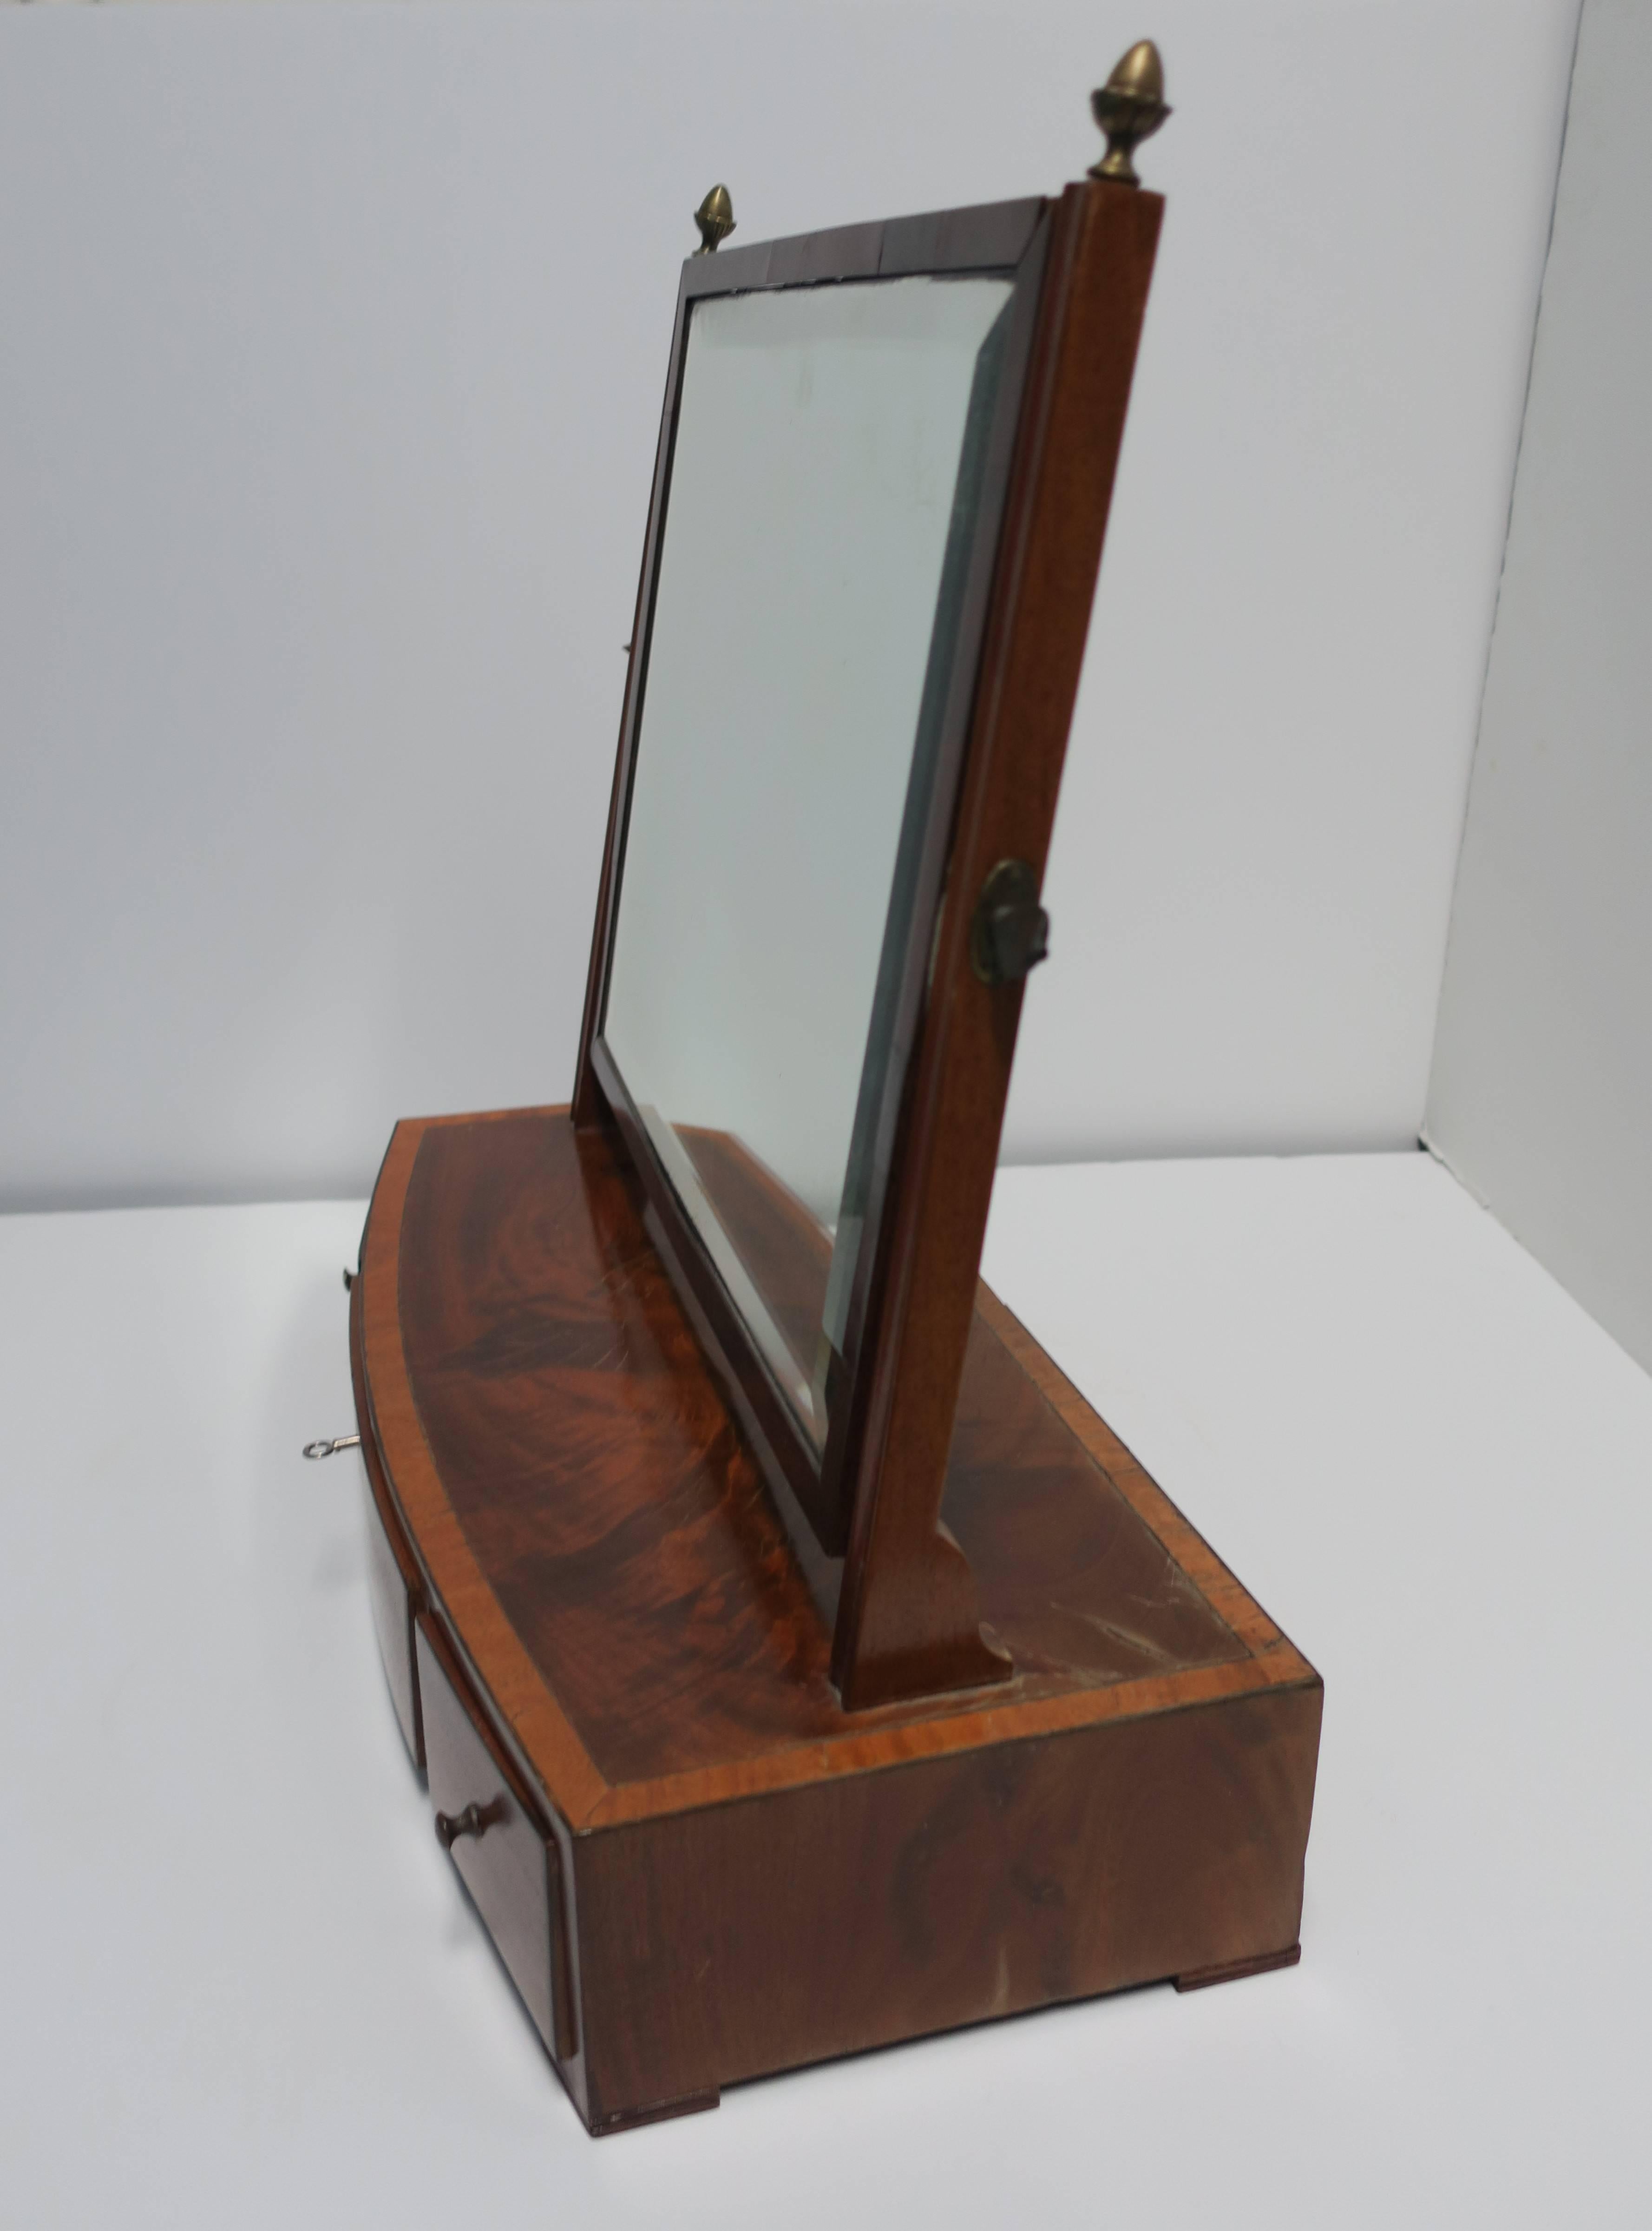 20th Century Antique Vanity Mirror with Drawers